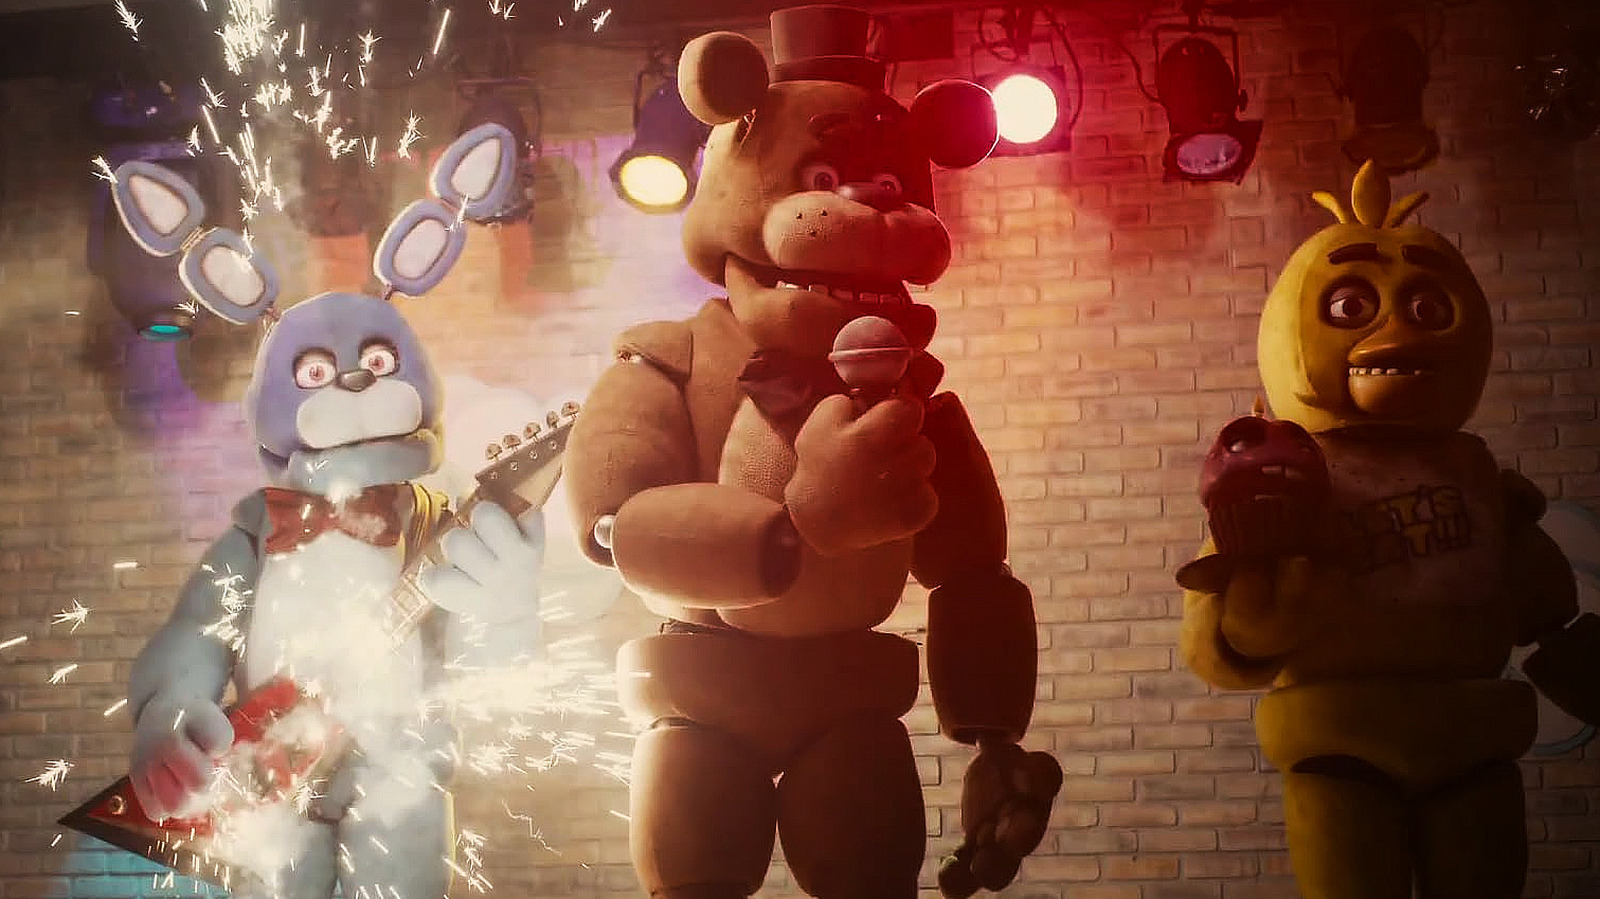 Five Nights at Freddy's' dominates Halloween box office